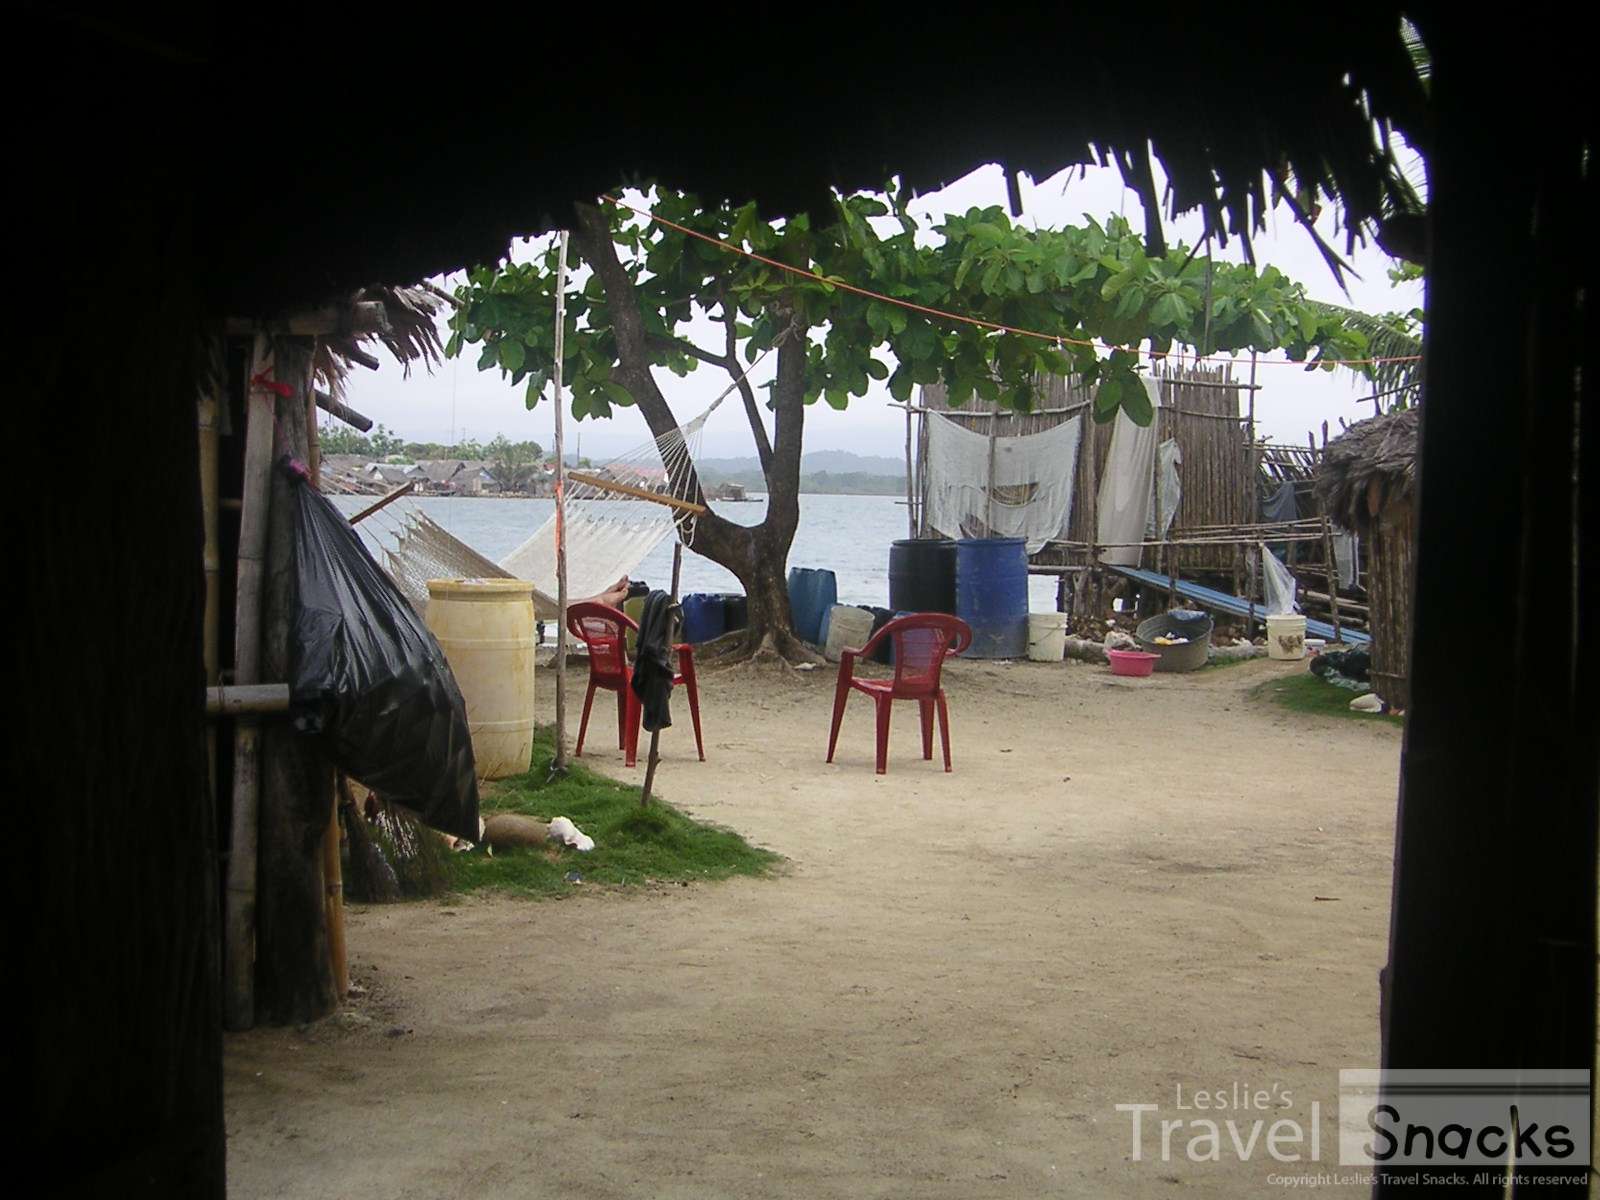 That raised outhouse across the courtyard on the right was my toilet in San Blas. It's just a seat with a hole that drops right into the water. Everyone can see what's coming out!